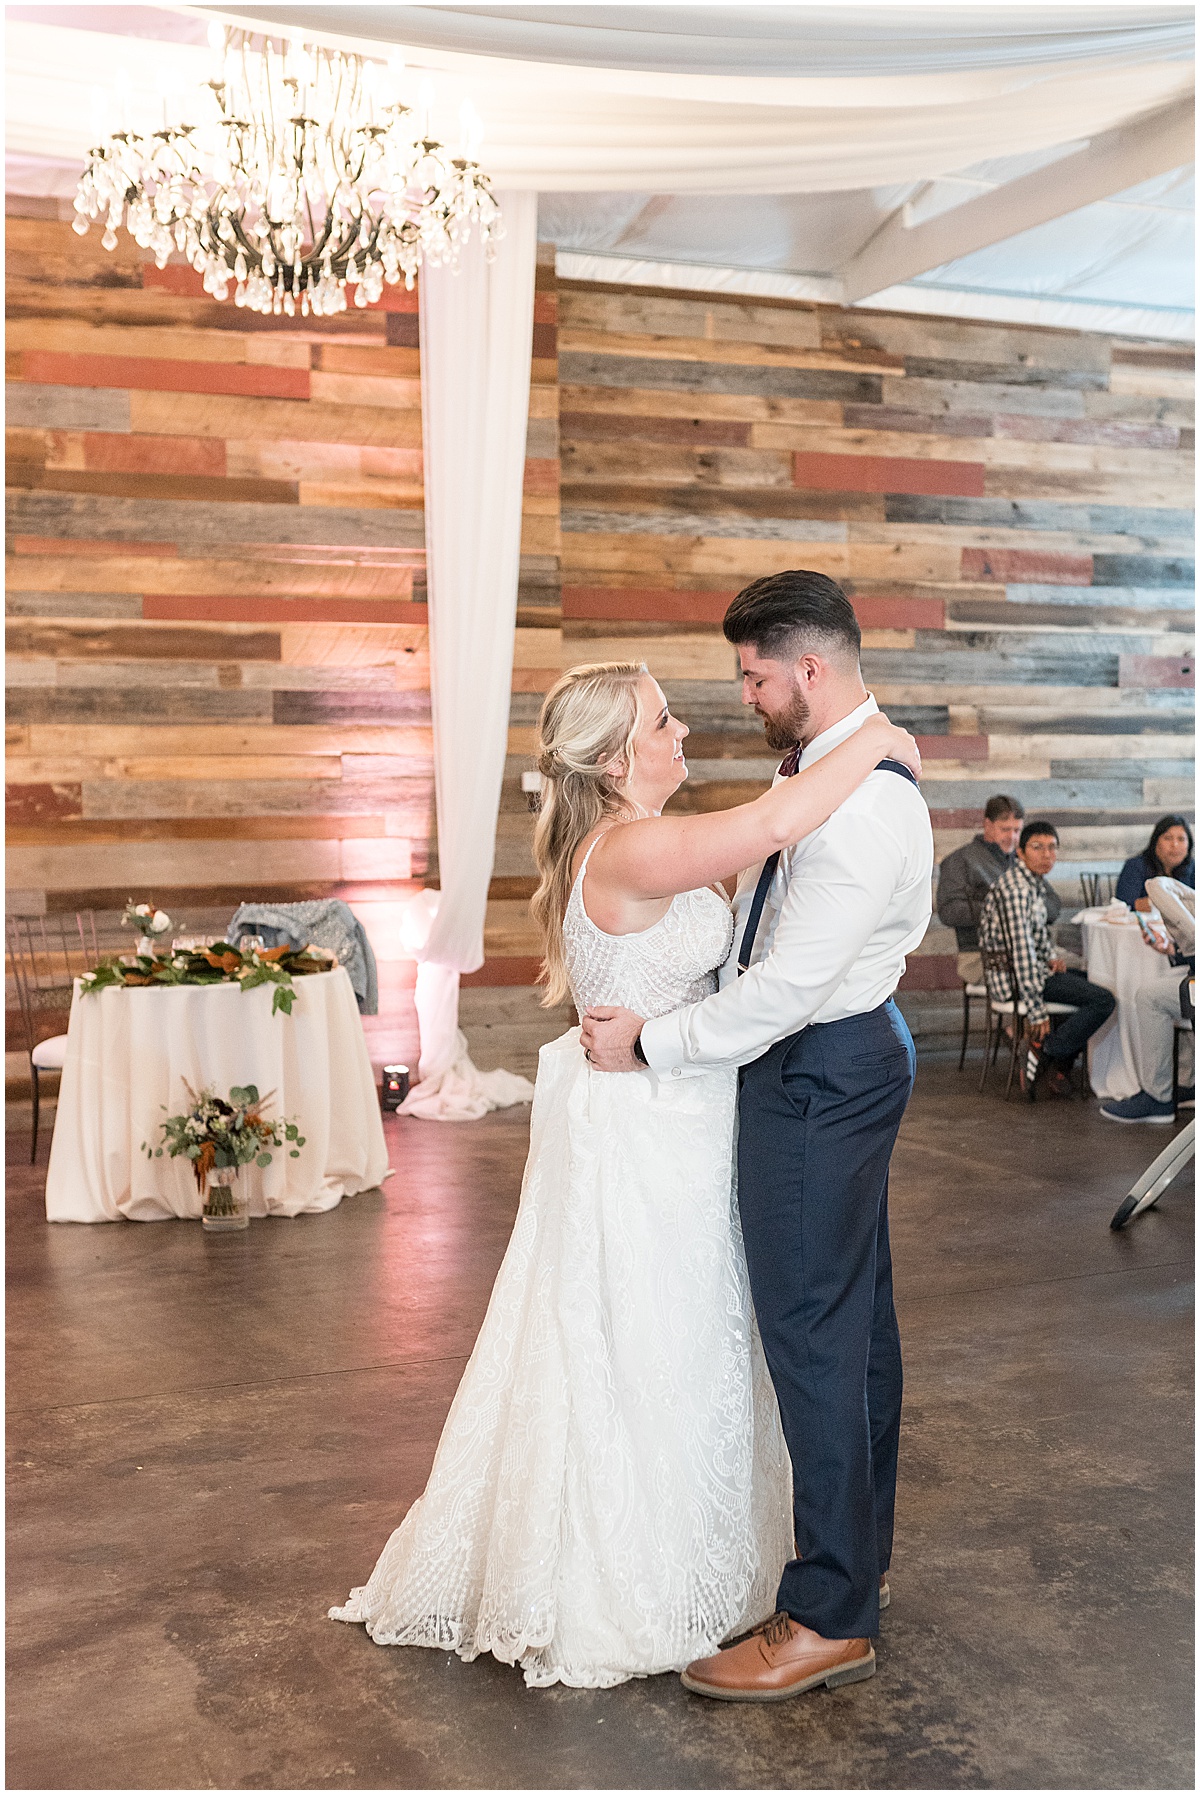 Bride and groom first dance at Finley Creek Vineyards wedding in Zionsville, Indiana